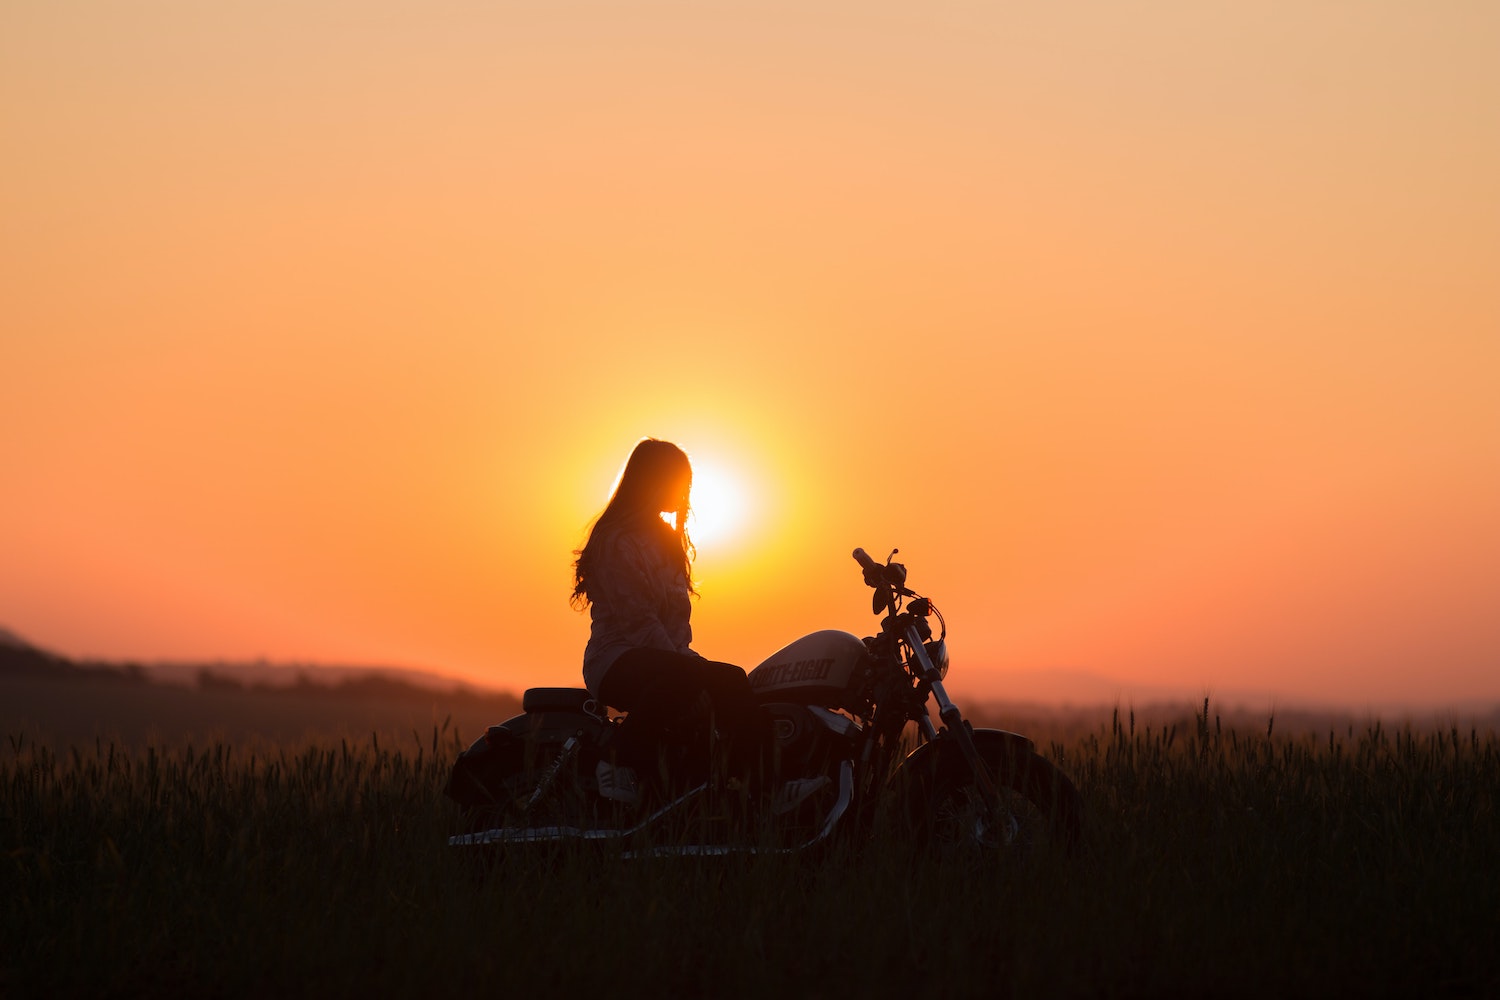 Woman sitting atop a Harley Davidson motorcycle while watching the sun set, a grassy field visible in the background.